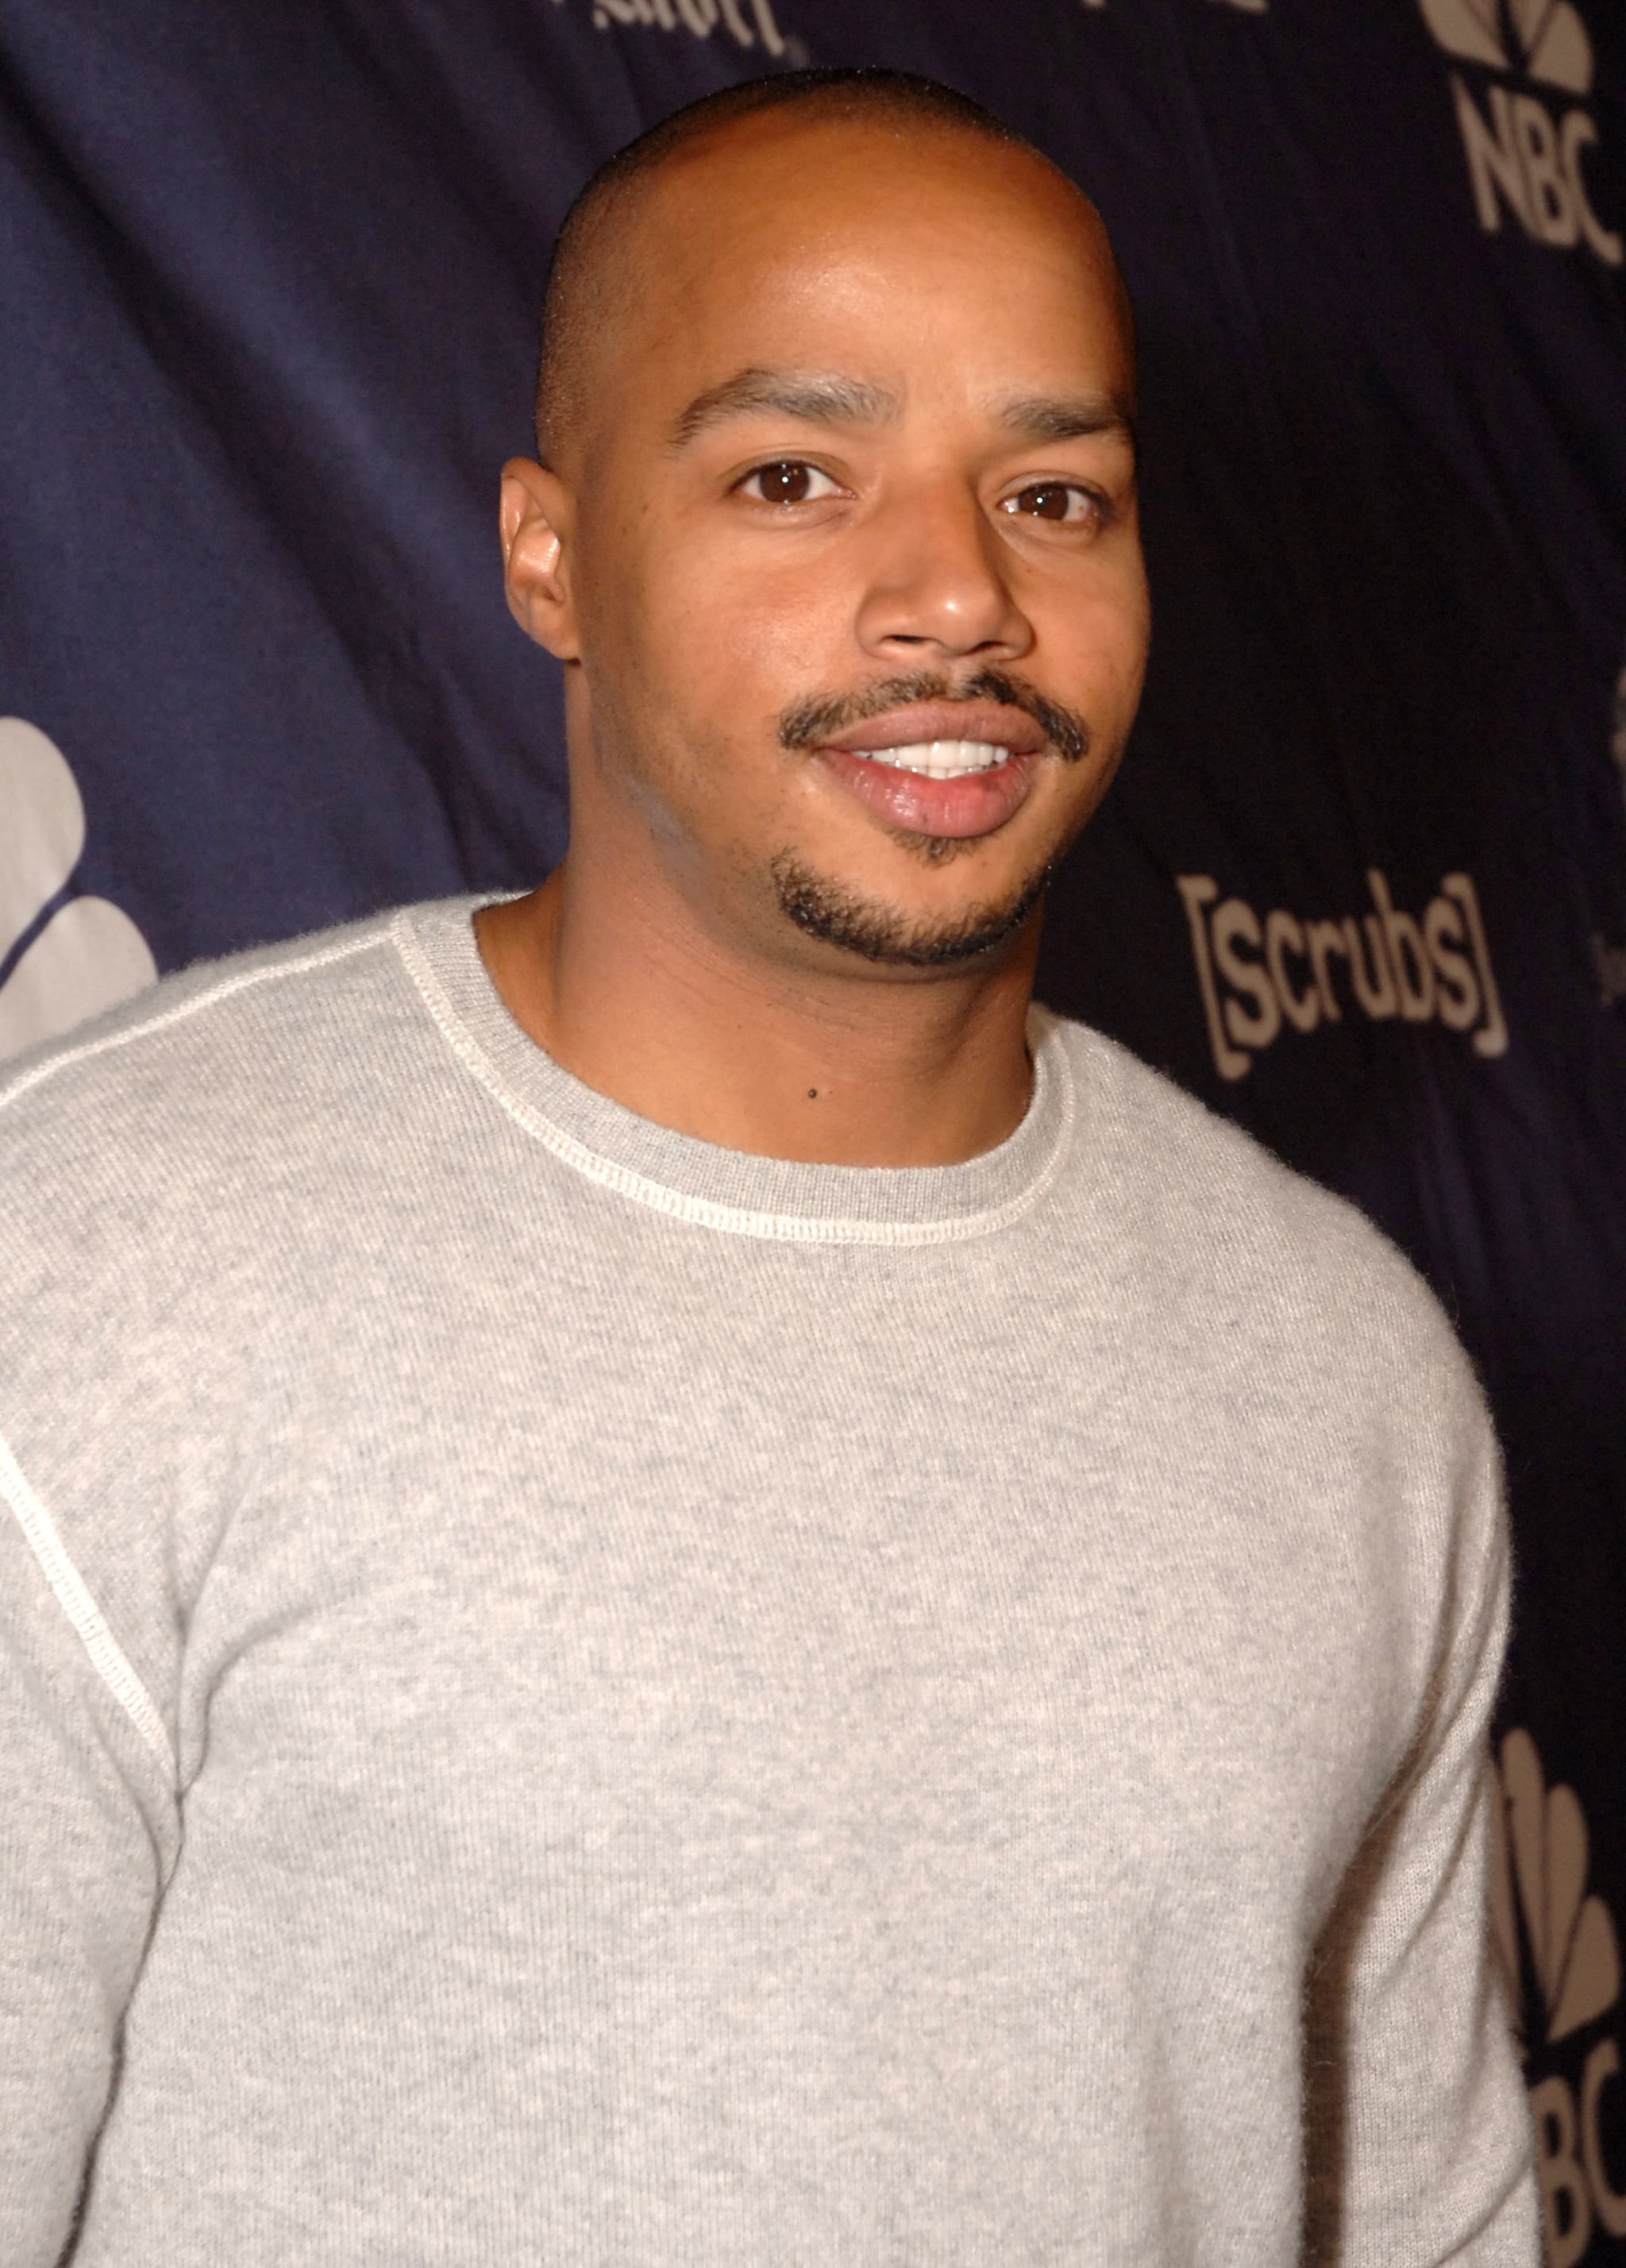 Donald Faison: The premiere of the new season of Scrubs TV show, 2008 TV series event. 2050x2860 HD Wallpaper.